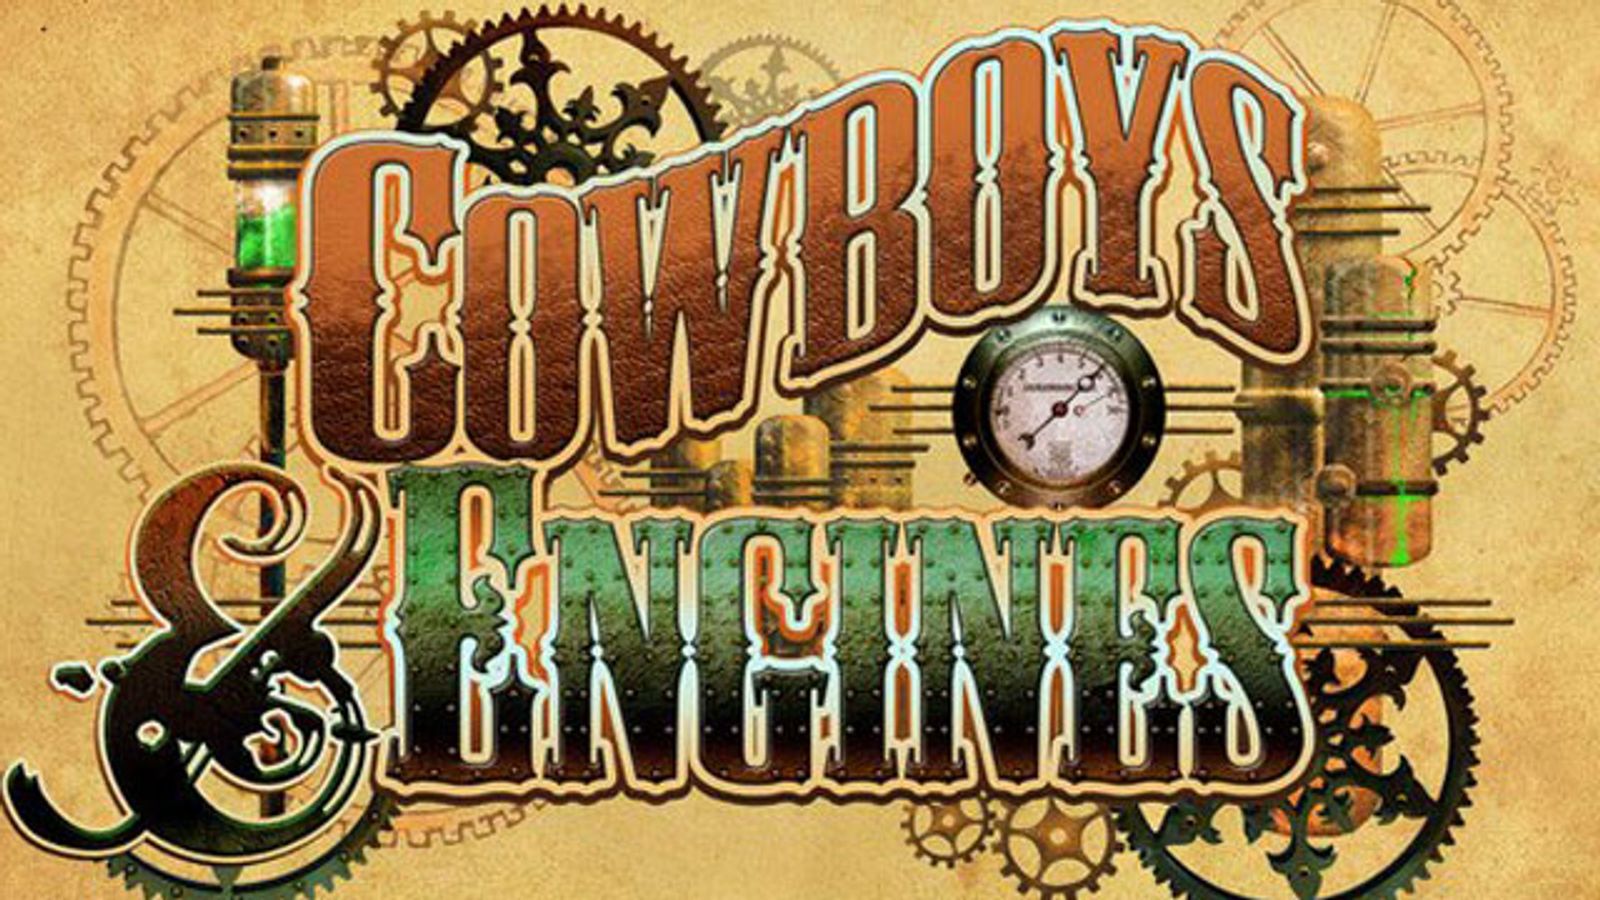 'Cowboys & Engines' Trailer to Premiere at Comic-Con